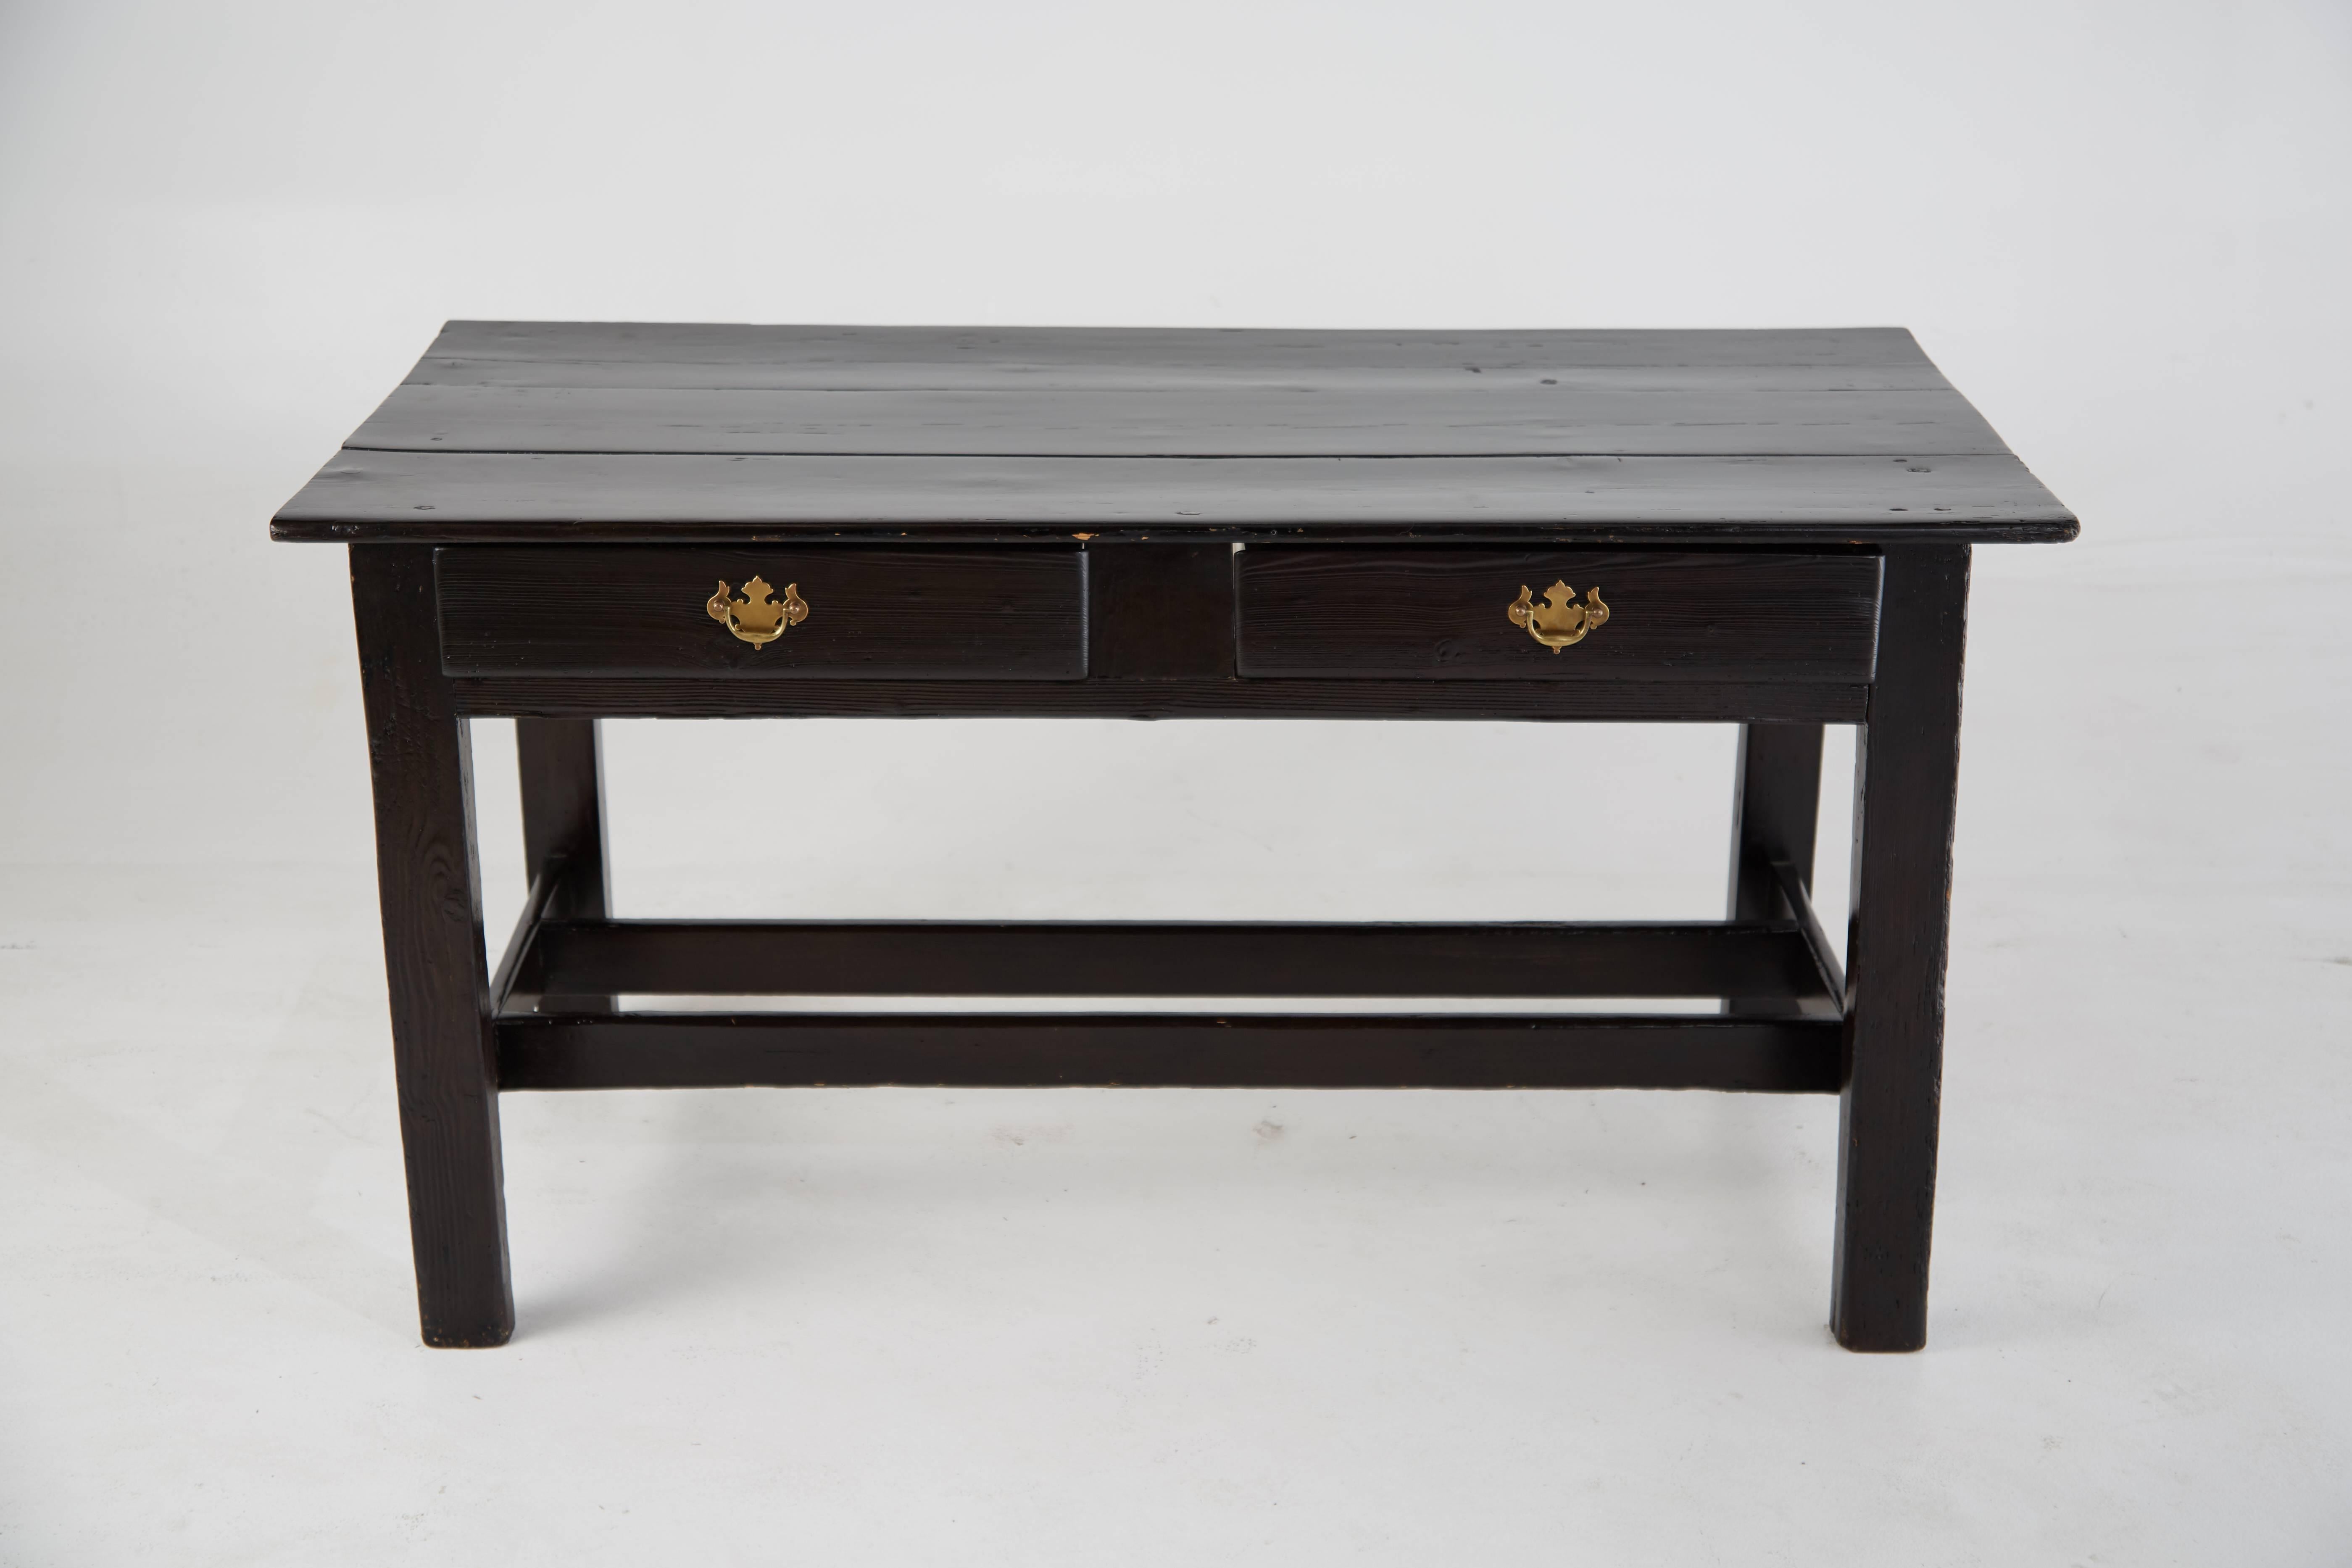 Sleek and simplistic black lacquered vintage wooden desk with brass ornate handle pulls. This desk features two pull-out drawers at the front and stretchers running along each side.

The clean lines and compact design would allow this desk to fit